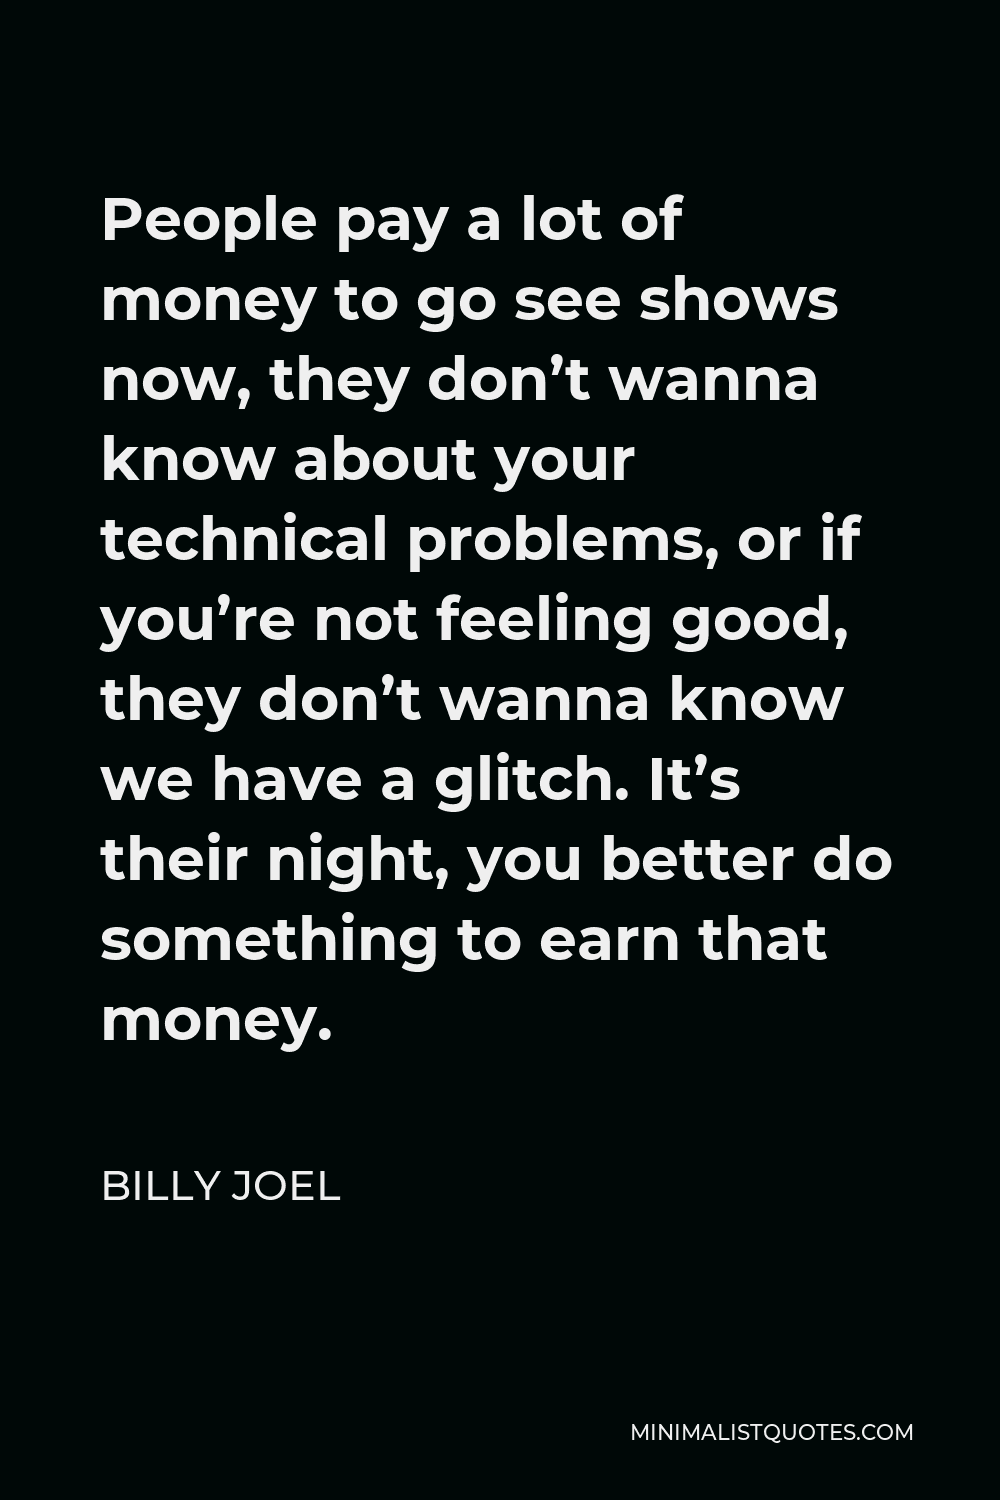 Billy Joel Quote - People pay a lot of money to go see shows now, they don’t wanna know about your technical problems, or if you’re not feeling good, they don’t wanna know we have a glitch. It’s their night, you better do something to earn that money.